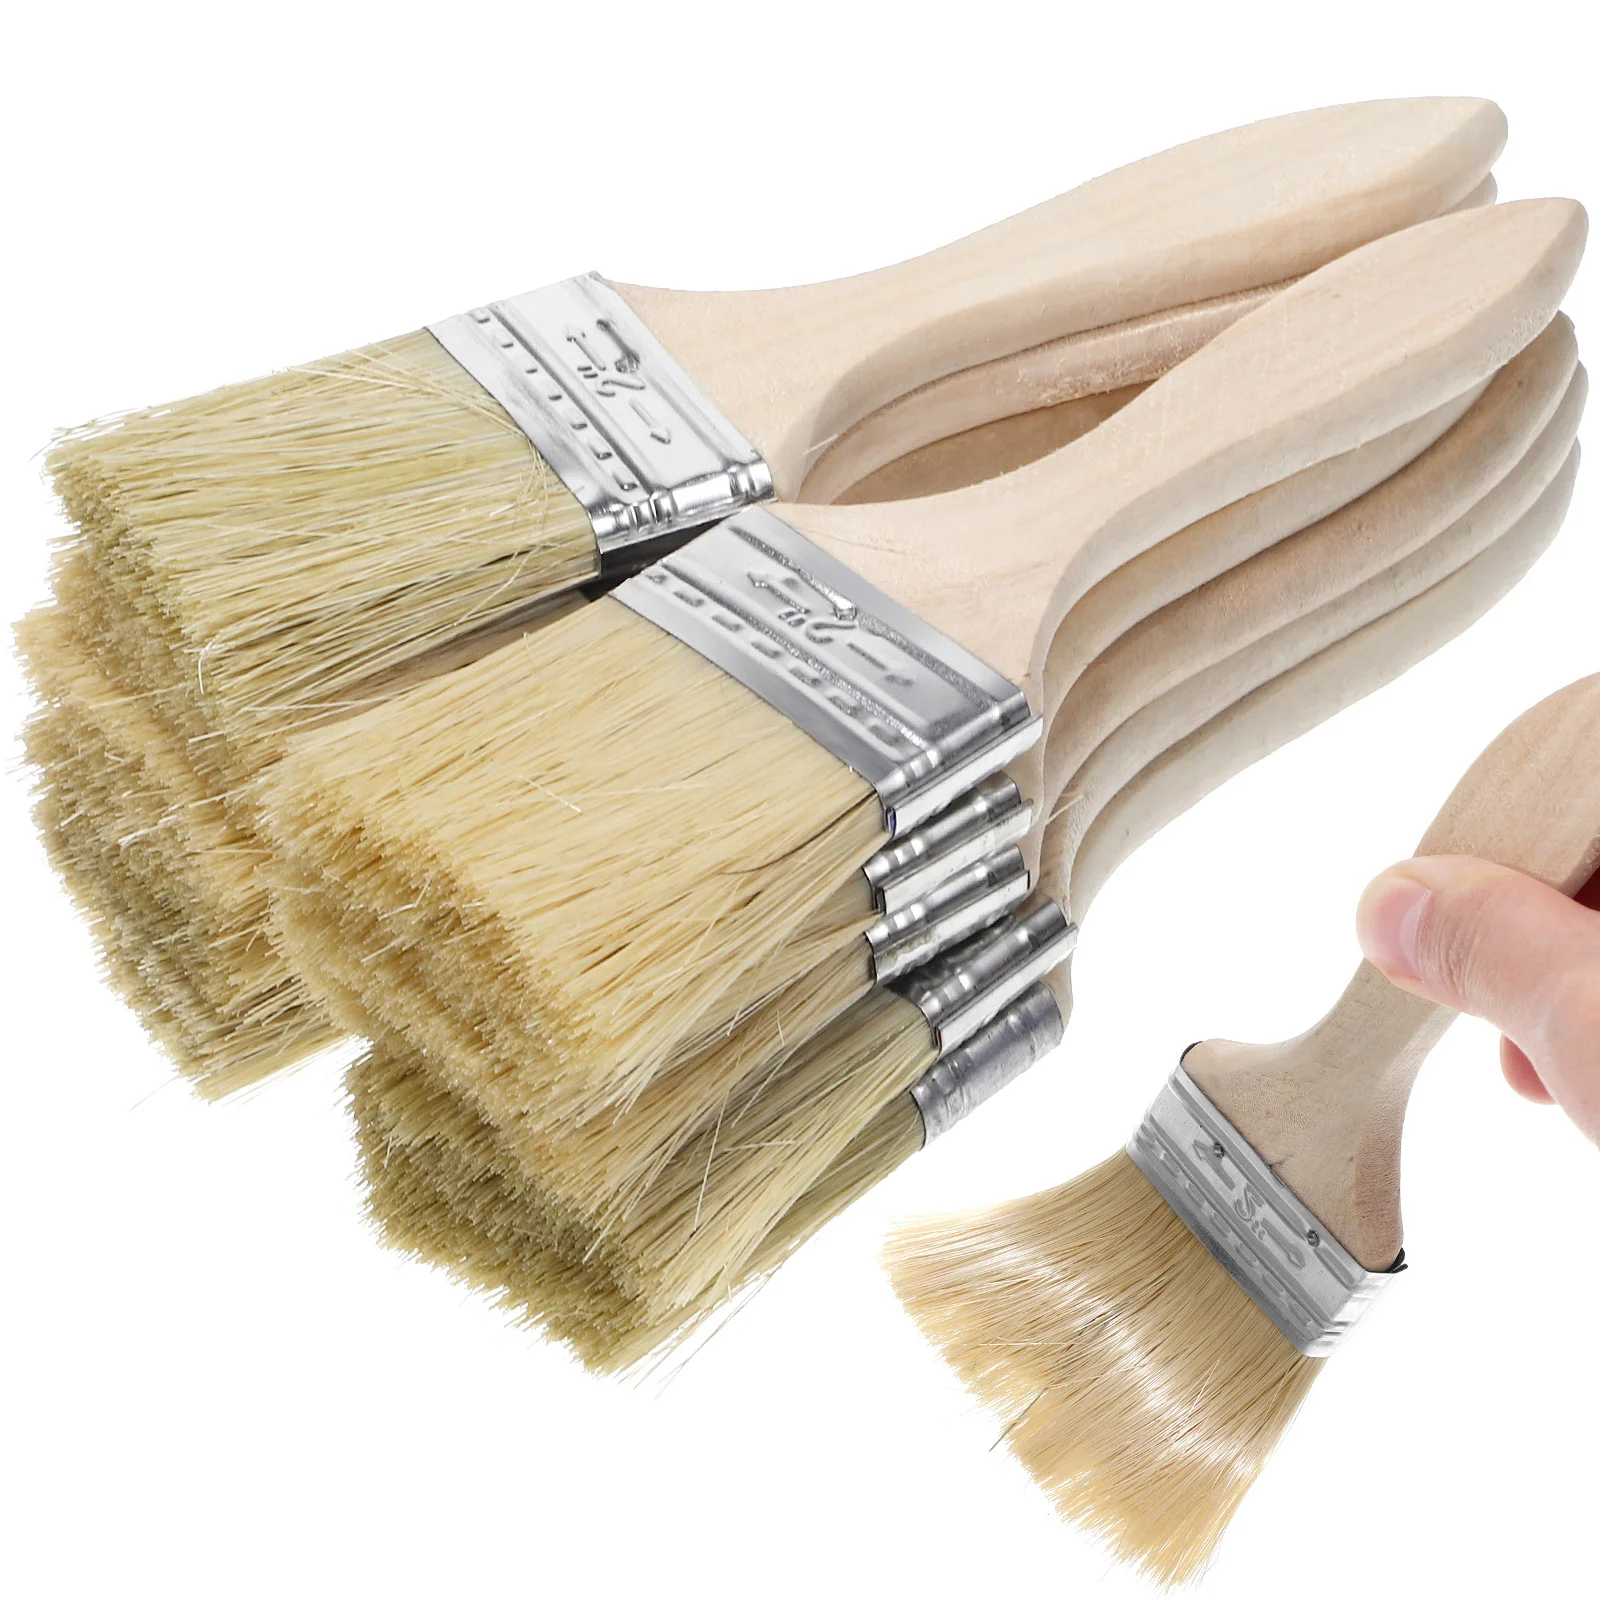 

10 Pcs Thickened Wooden Handle Paint Brush Chalk Small Brushes for Painting Chip Stencil Butter Wall Mural